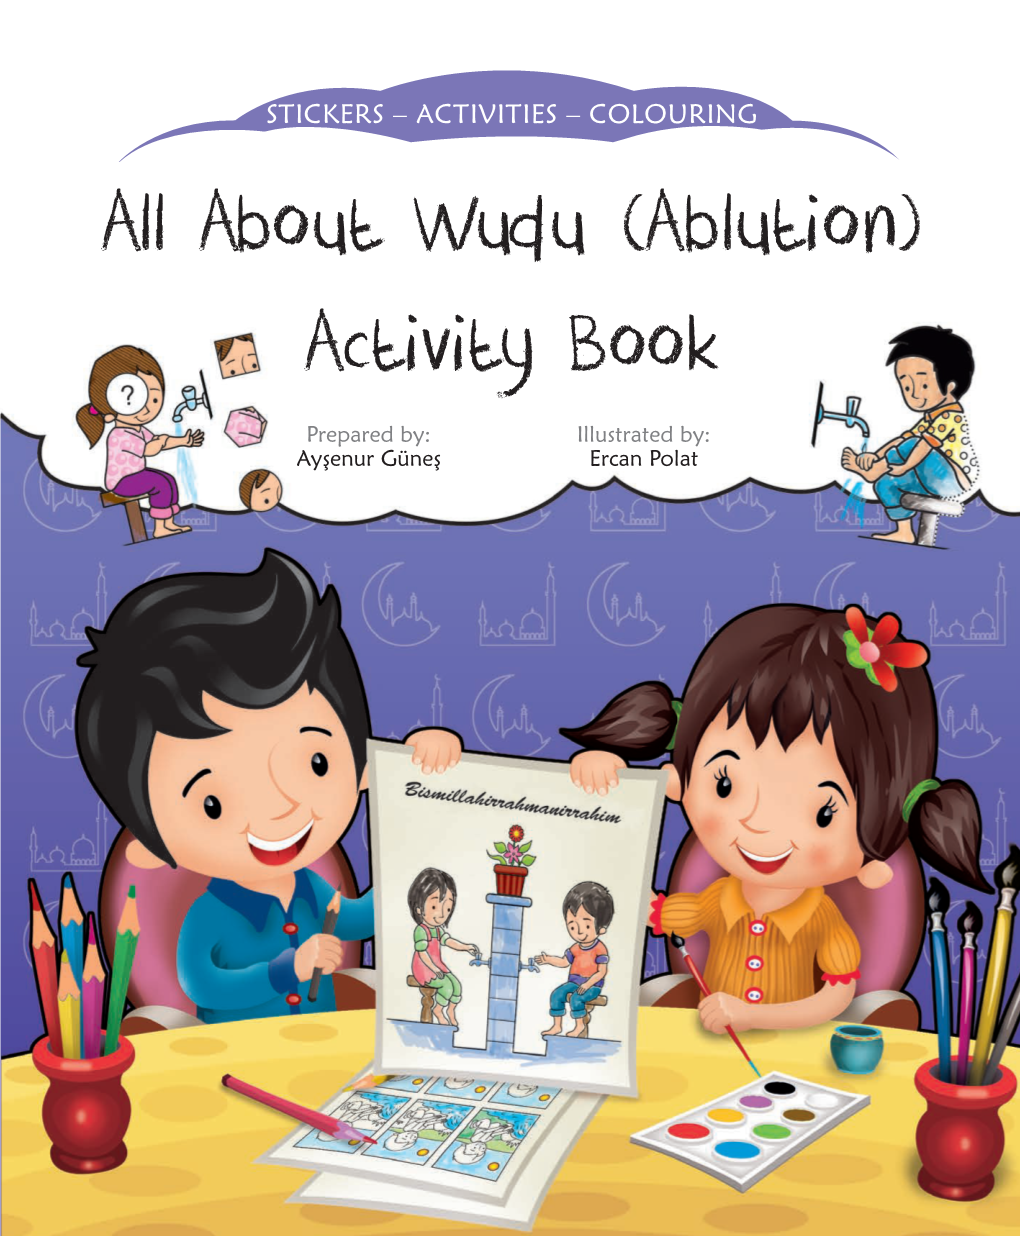 All About Wudu (Ablution) Activity Book Prepared By: Illustrated By: Ayşenur Güneş Ercan Polat